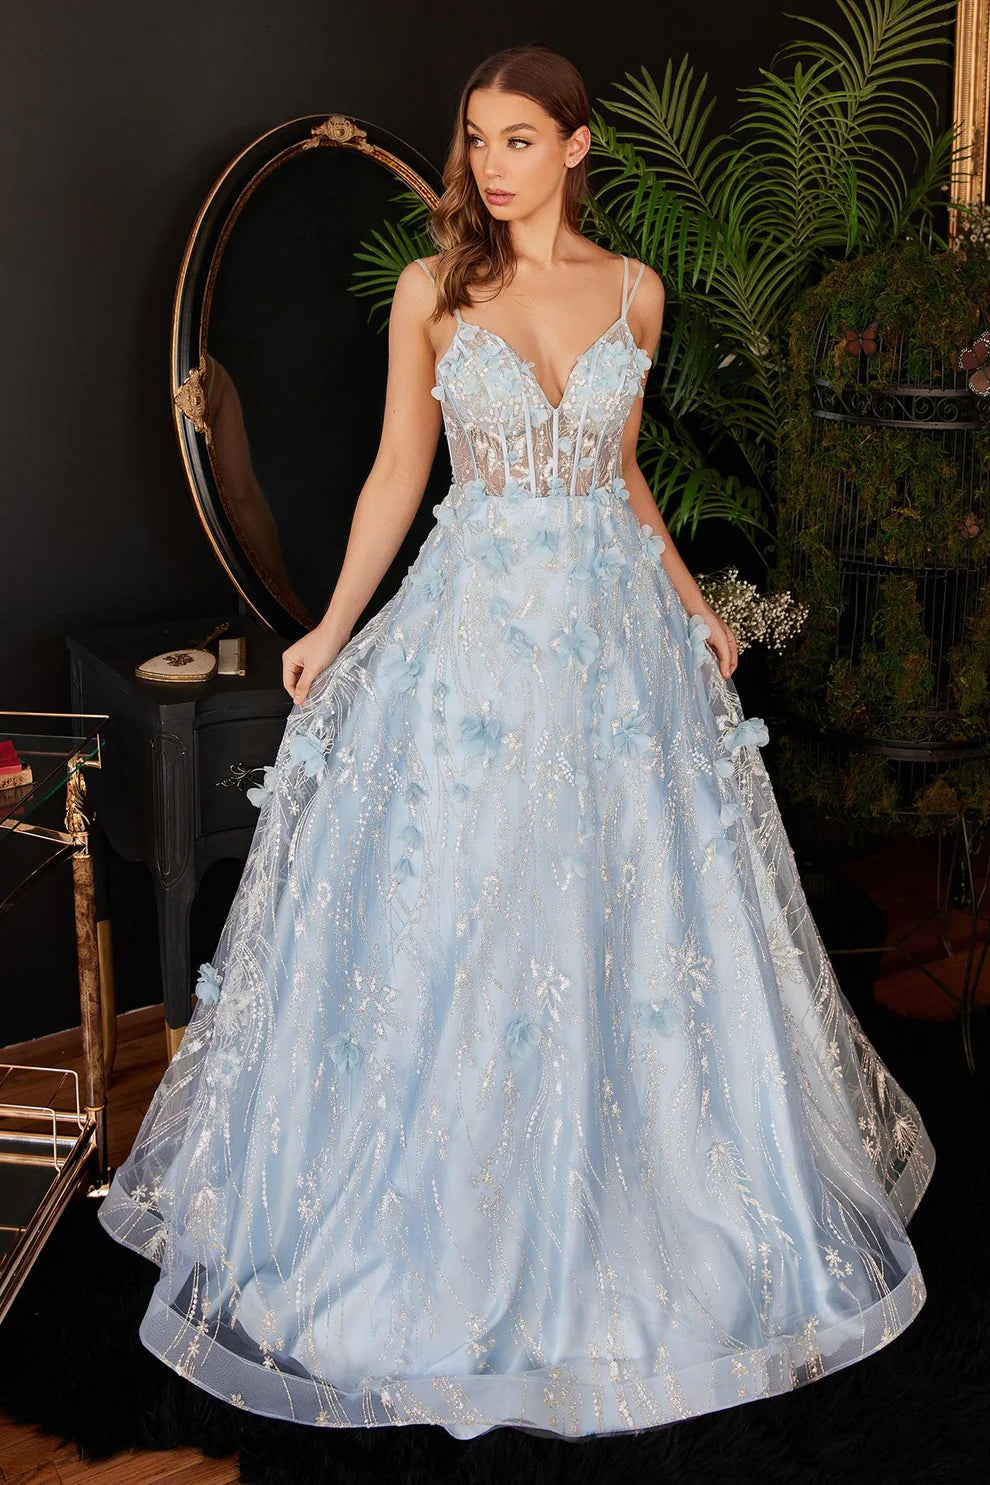 The #1 Quinceanera Dresses | Princess Gown - Buy the Perfect Quince Dress  for your Coming of Age, Shop Online for Amazing Quinceanera Gowns of Every  Color, with Sleeves or Sleeveless